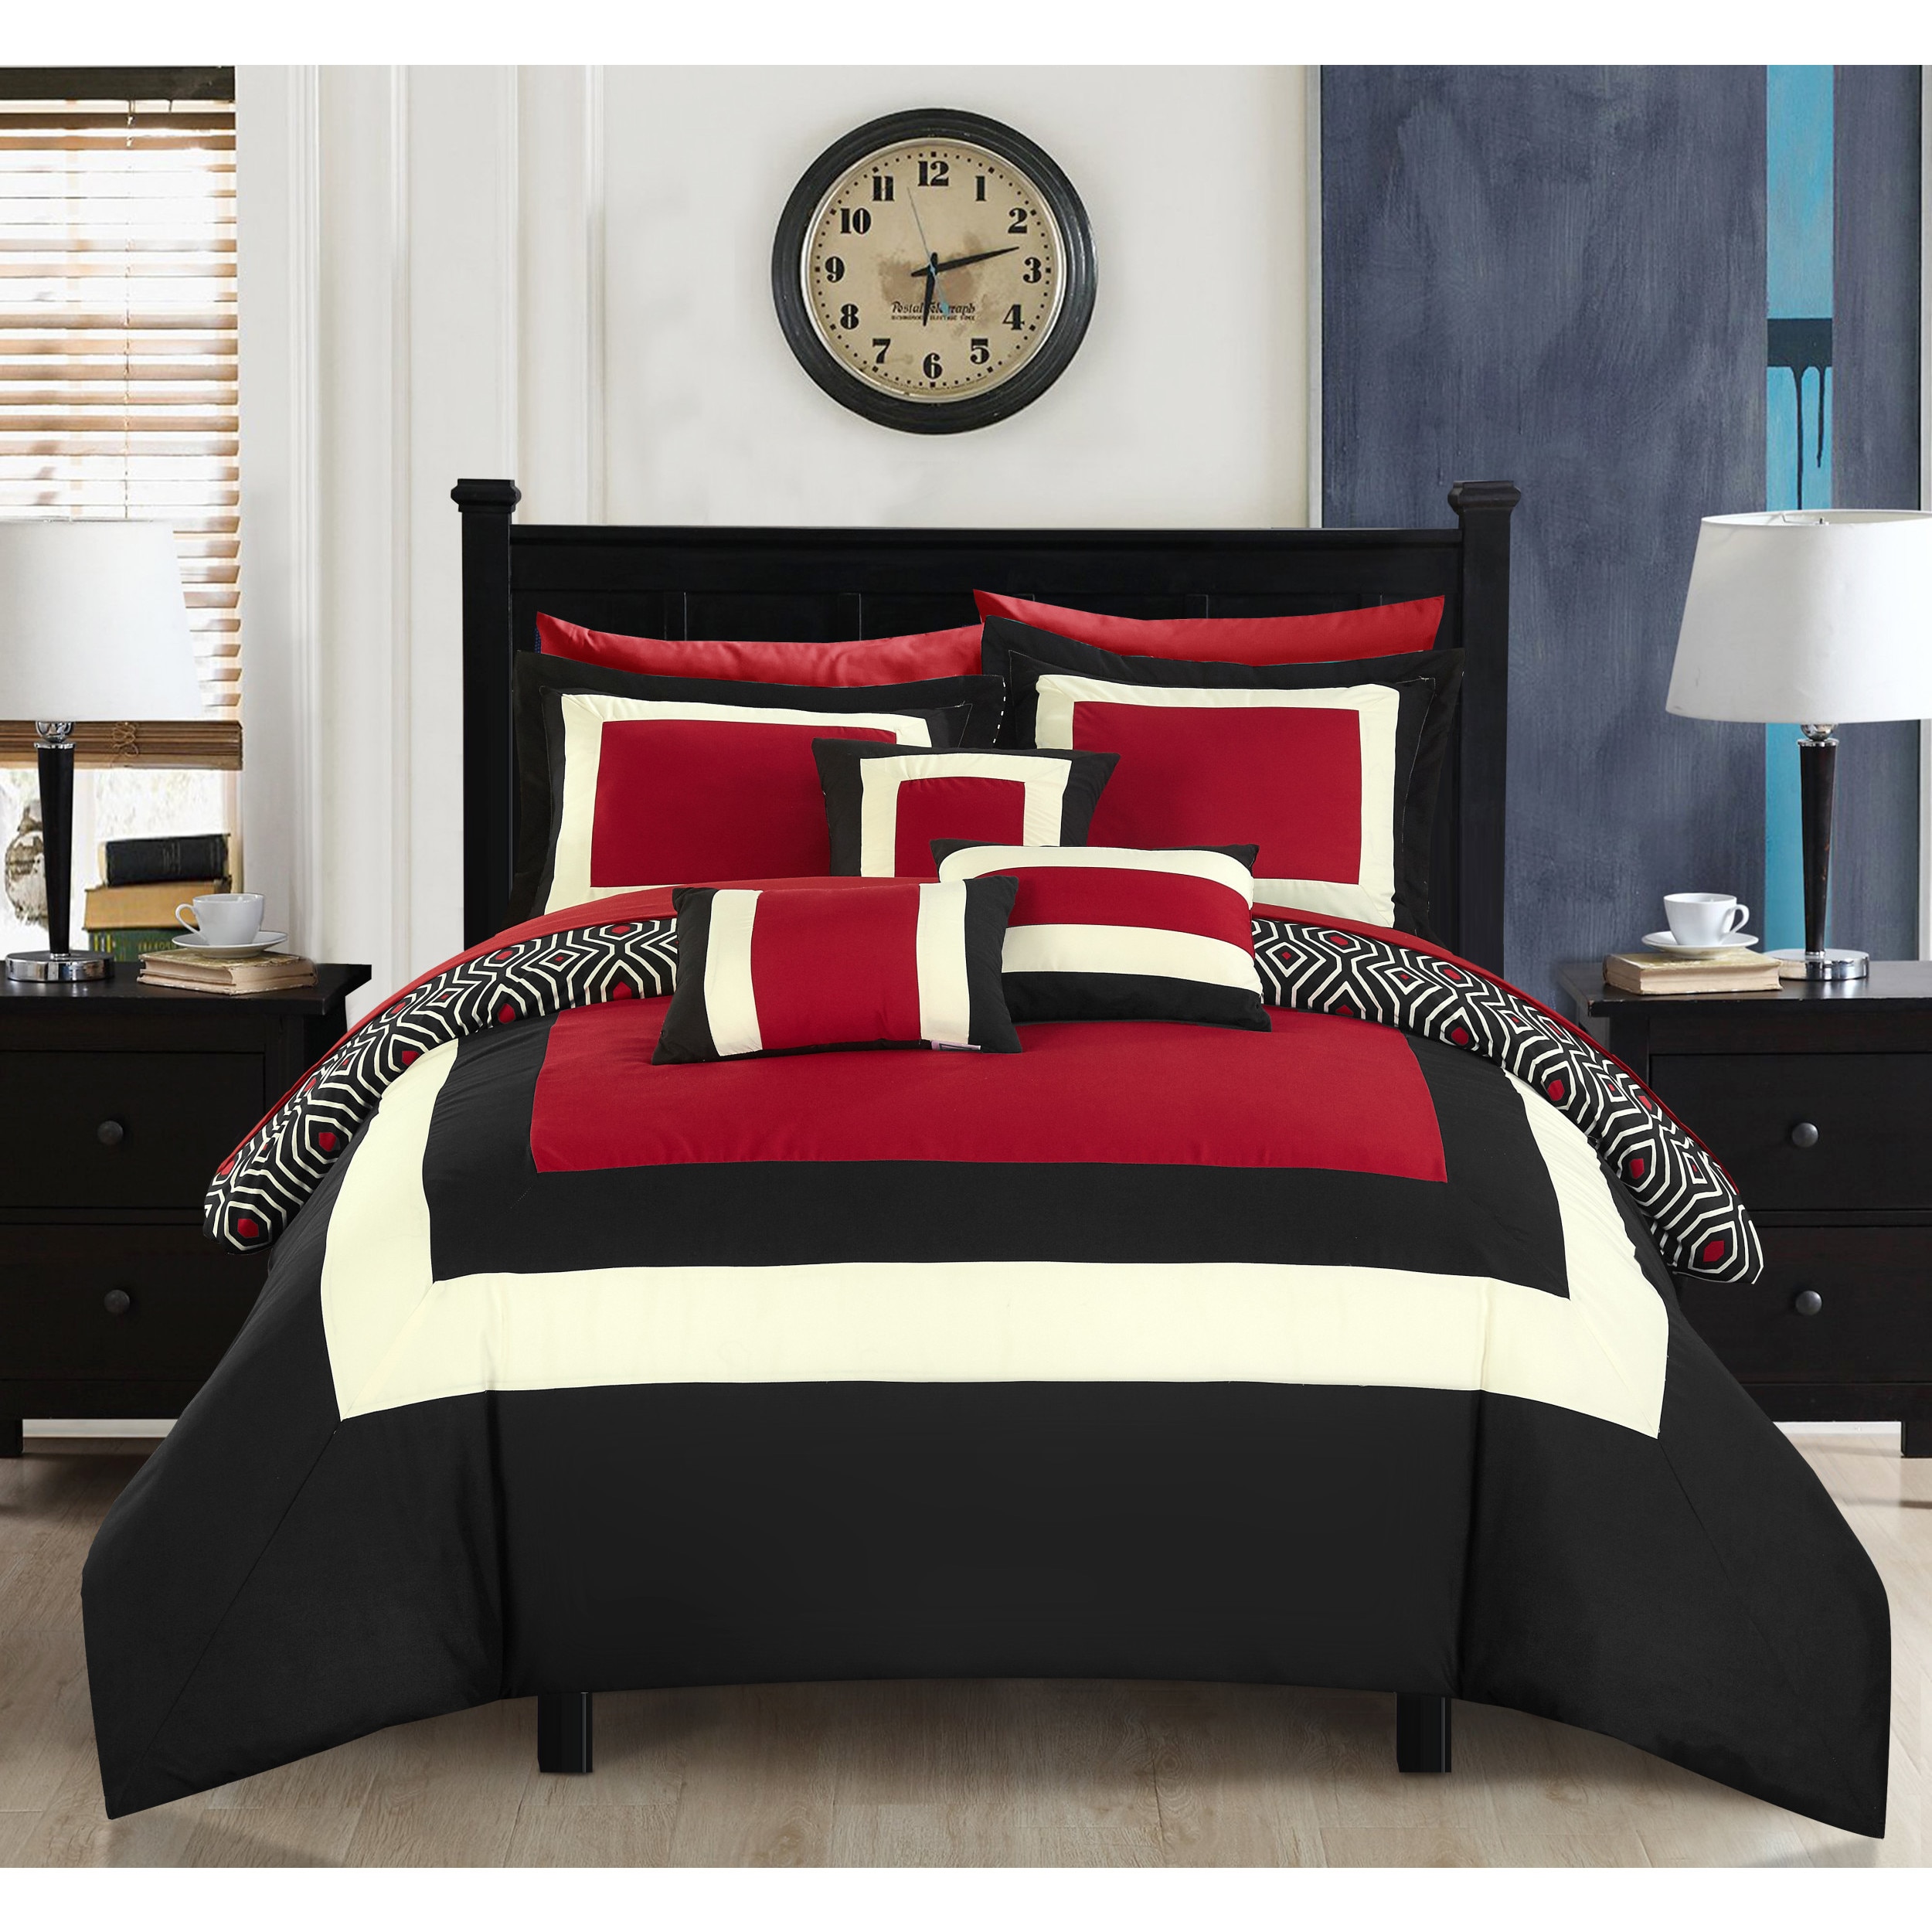 Sheets Shams Red Black Chic Home Serenity 10 Piece Comforter Set Pillows Bed In A Bag Home Garden